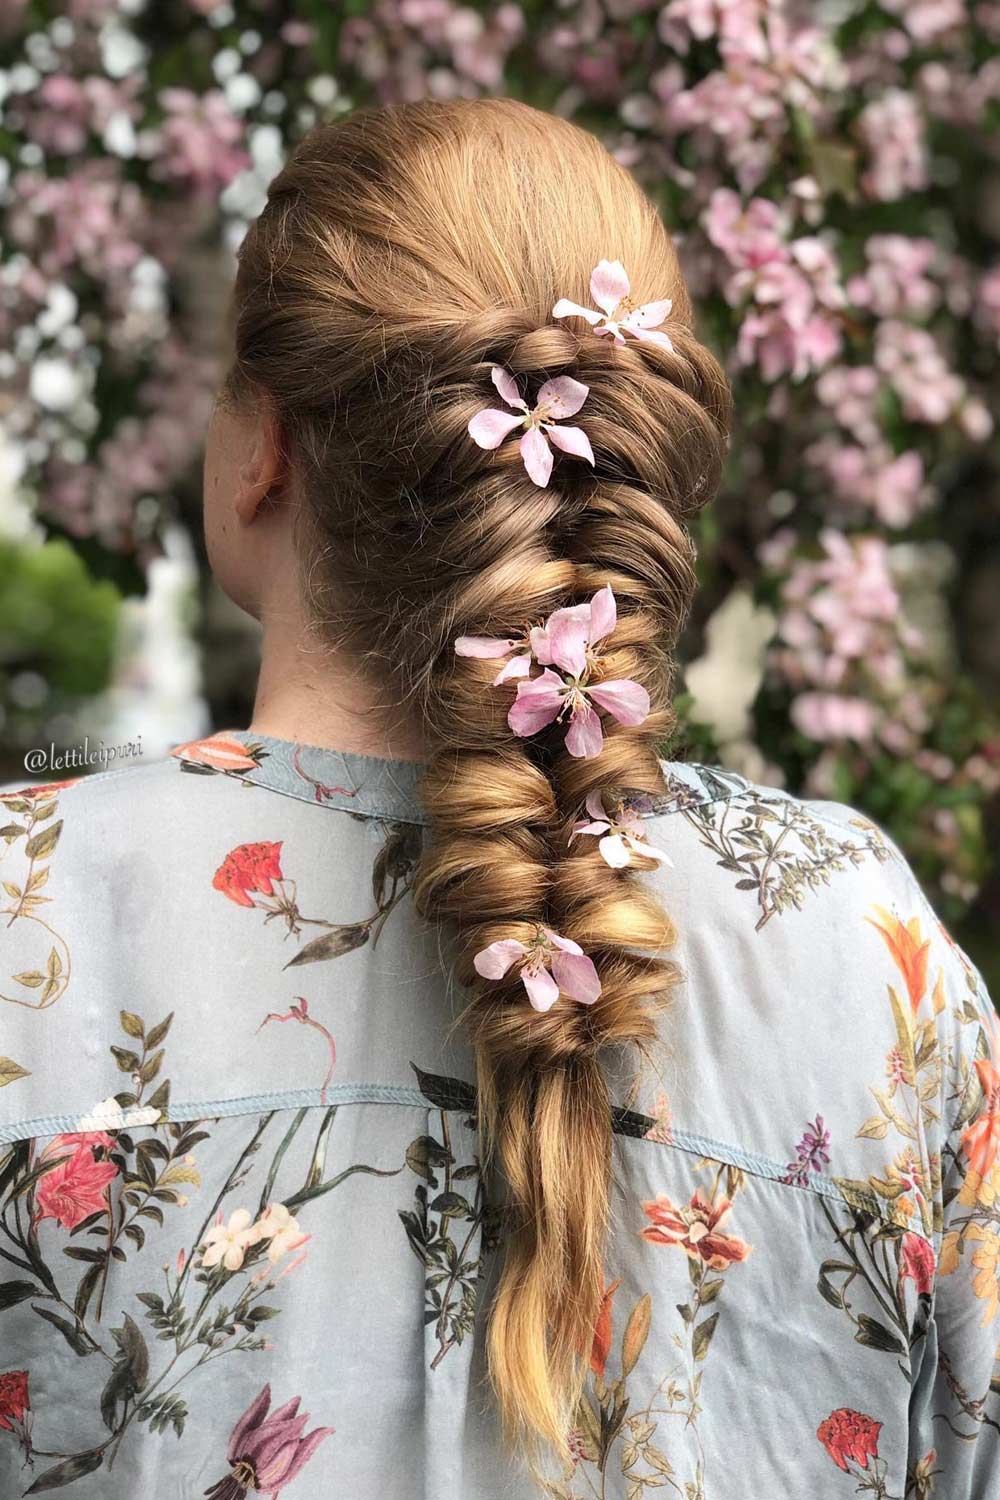 Boho Braided Hairstyles with Hair Flowers